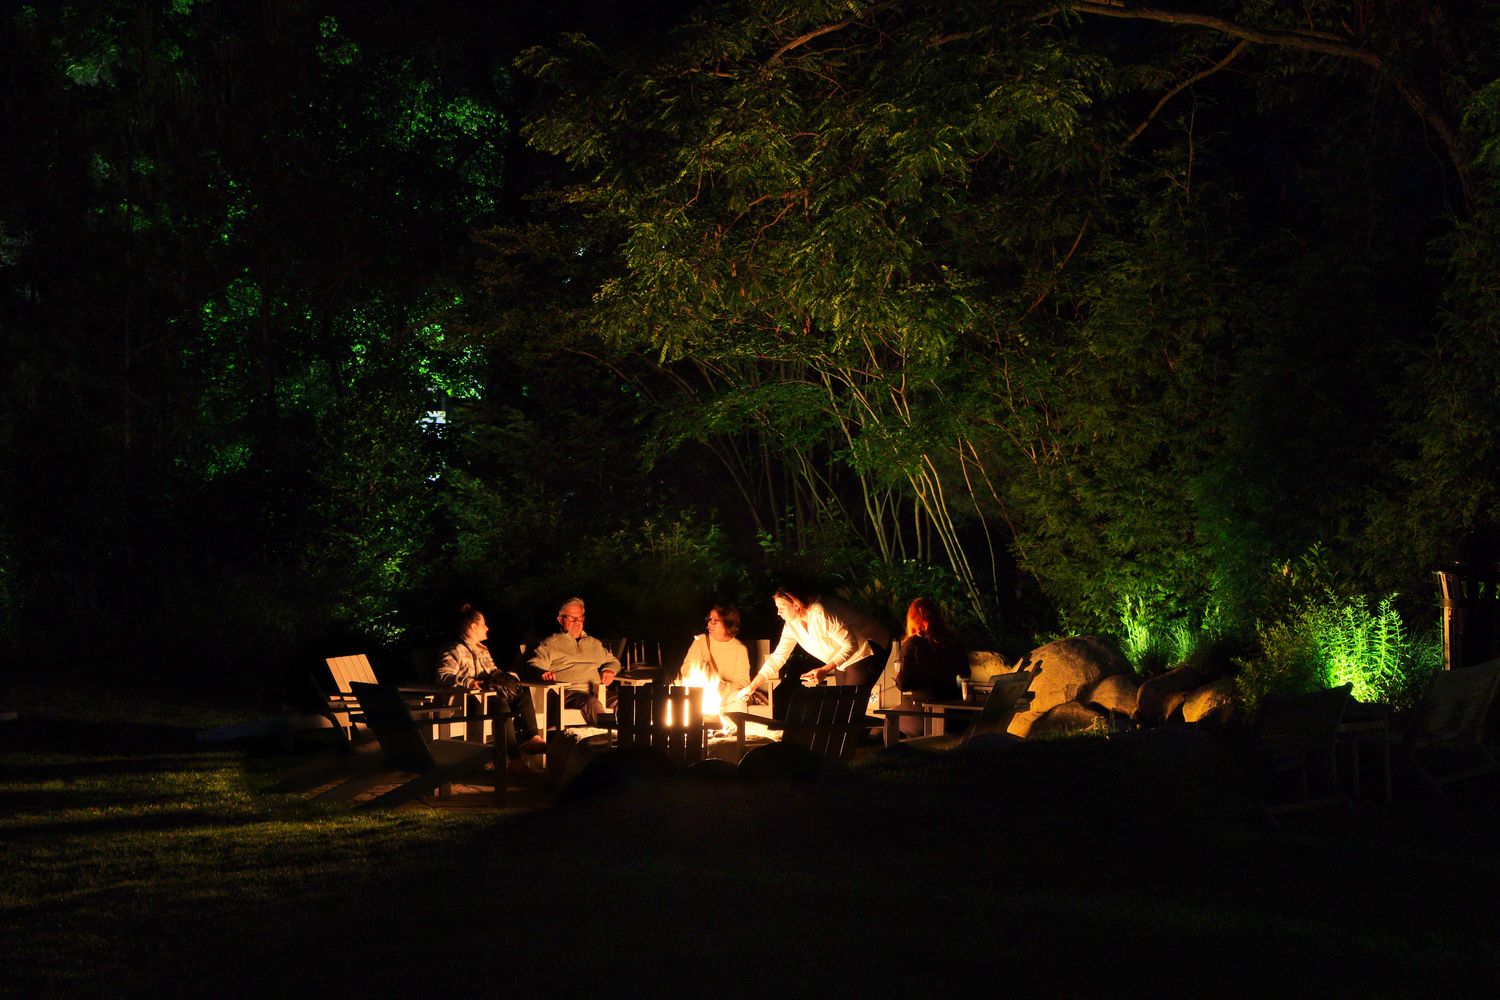 Guests of the Wildset Hotel around the firepit in St. Michaels, MD.